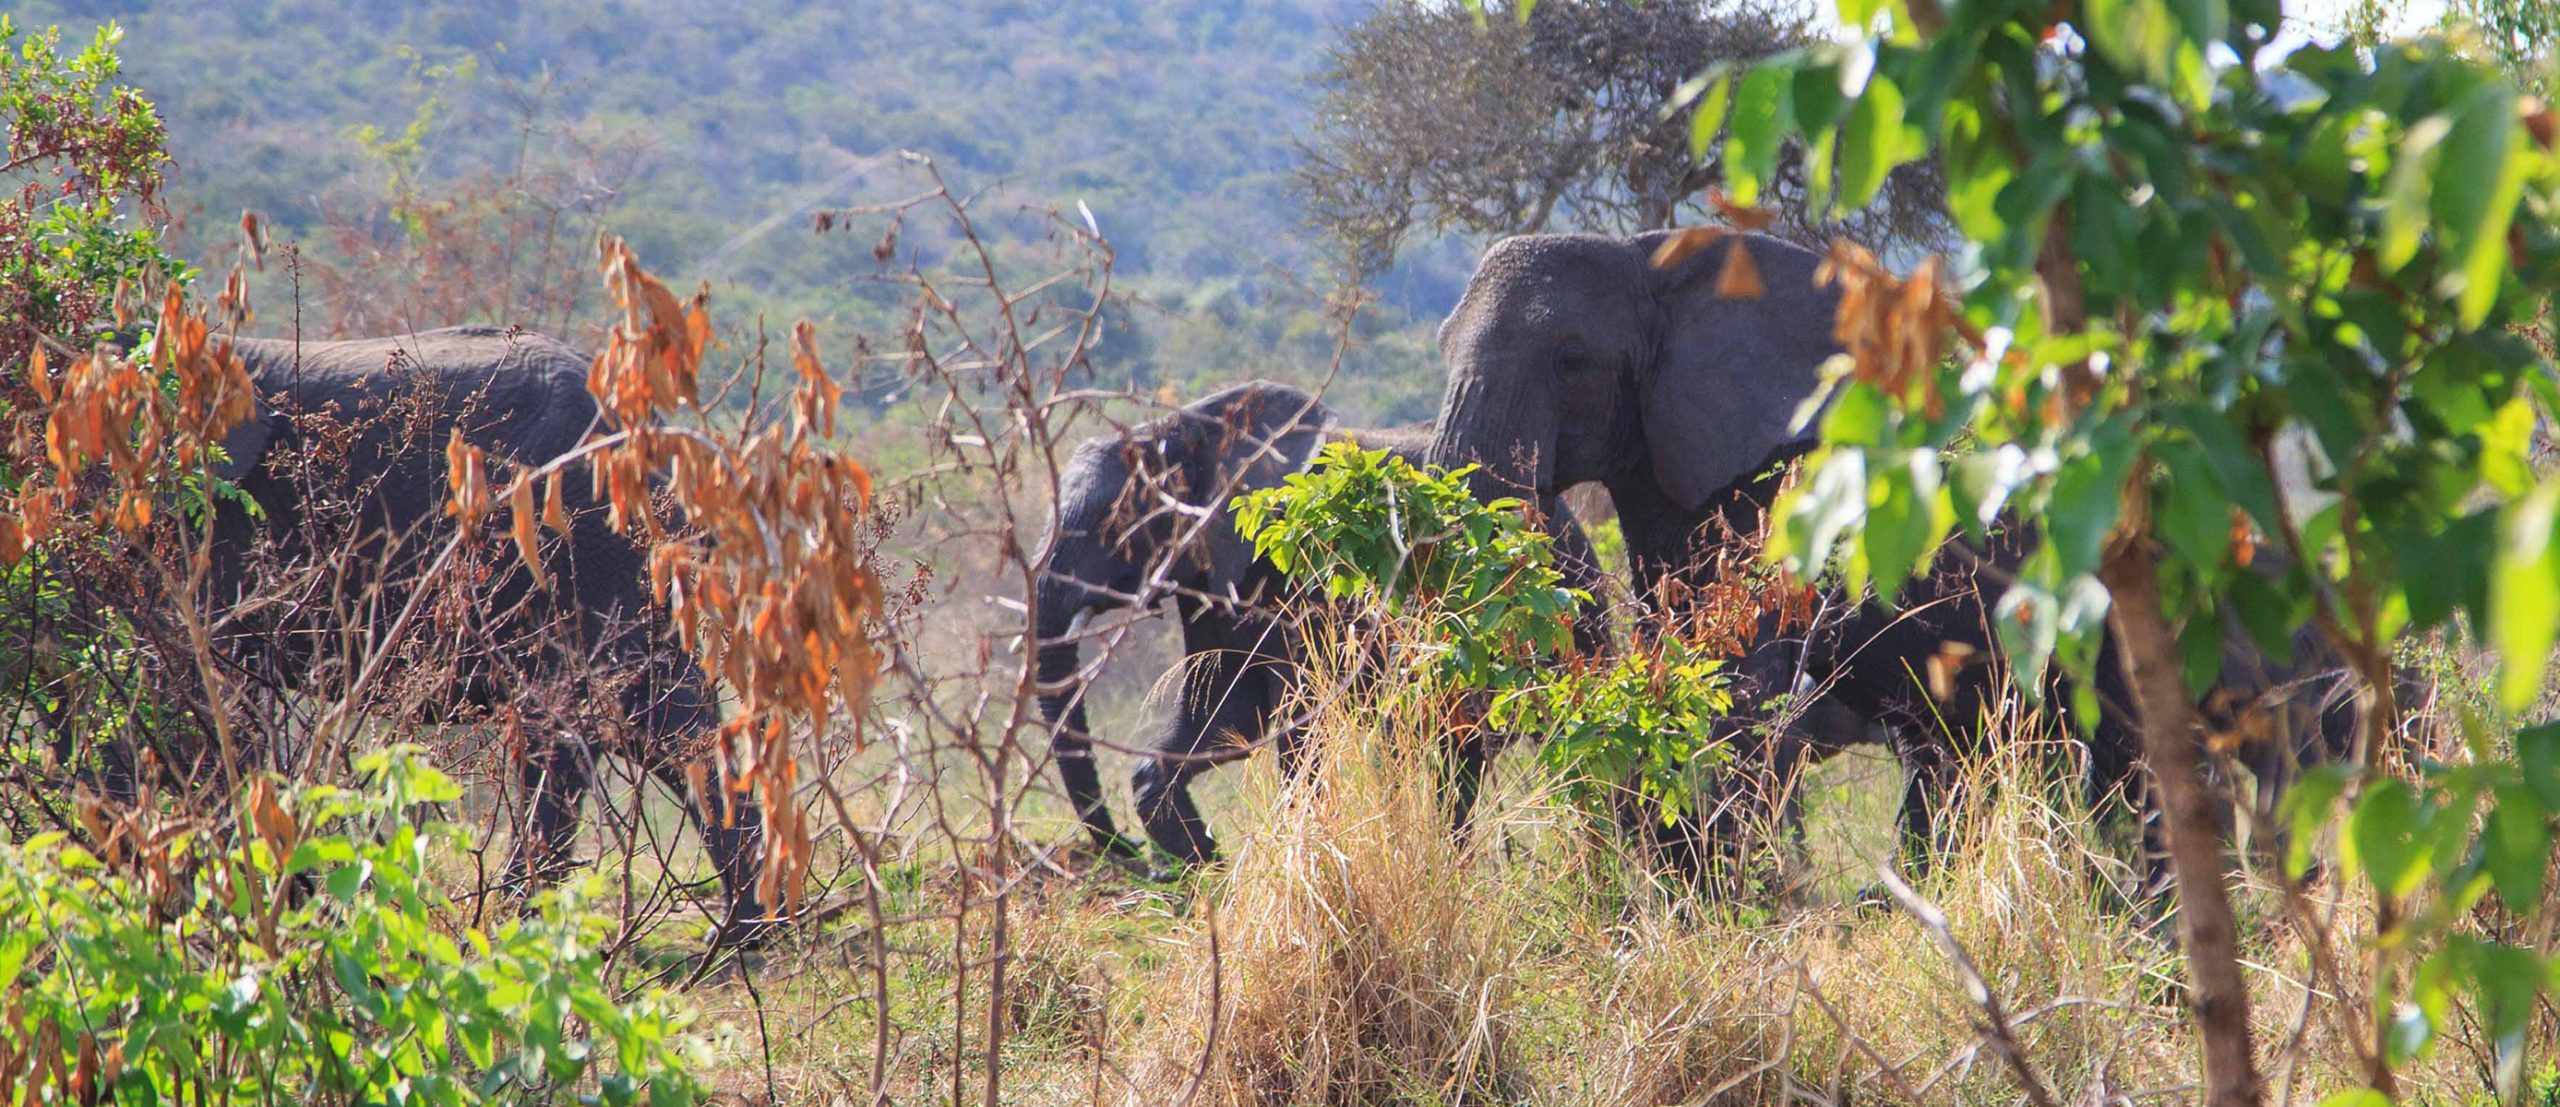 wildlife game safari in Akagera National Park, where you can spot animals such as lions, elephants, zebras, and hippos.